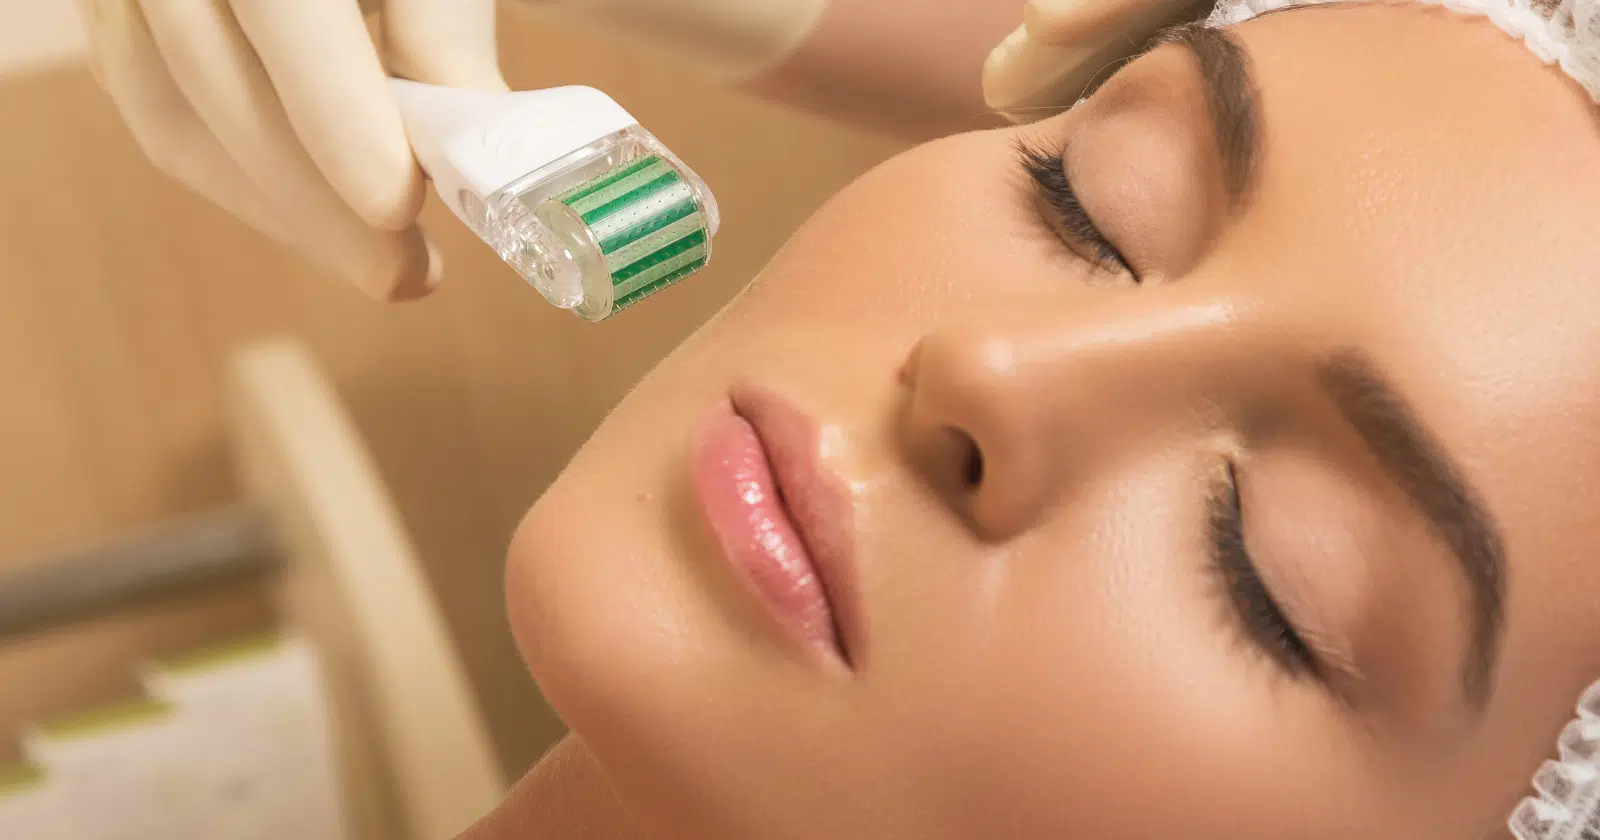 Microdermabrasion vs Microneedling: What’s the Difference?